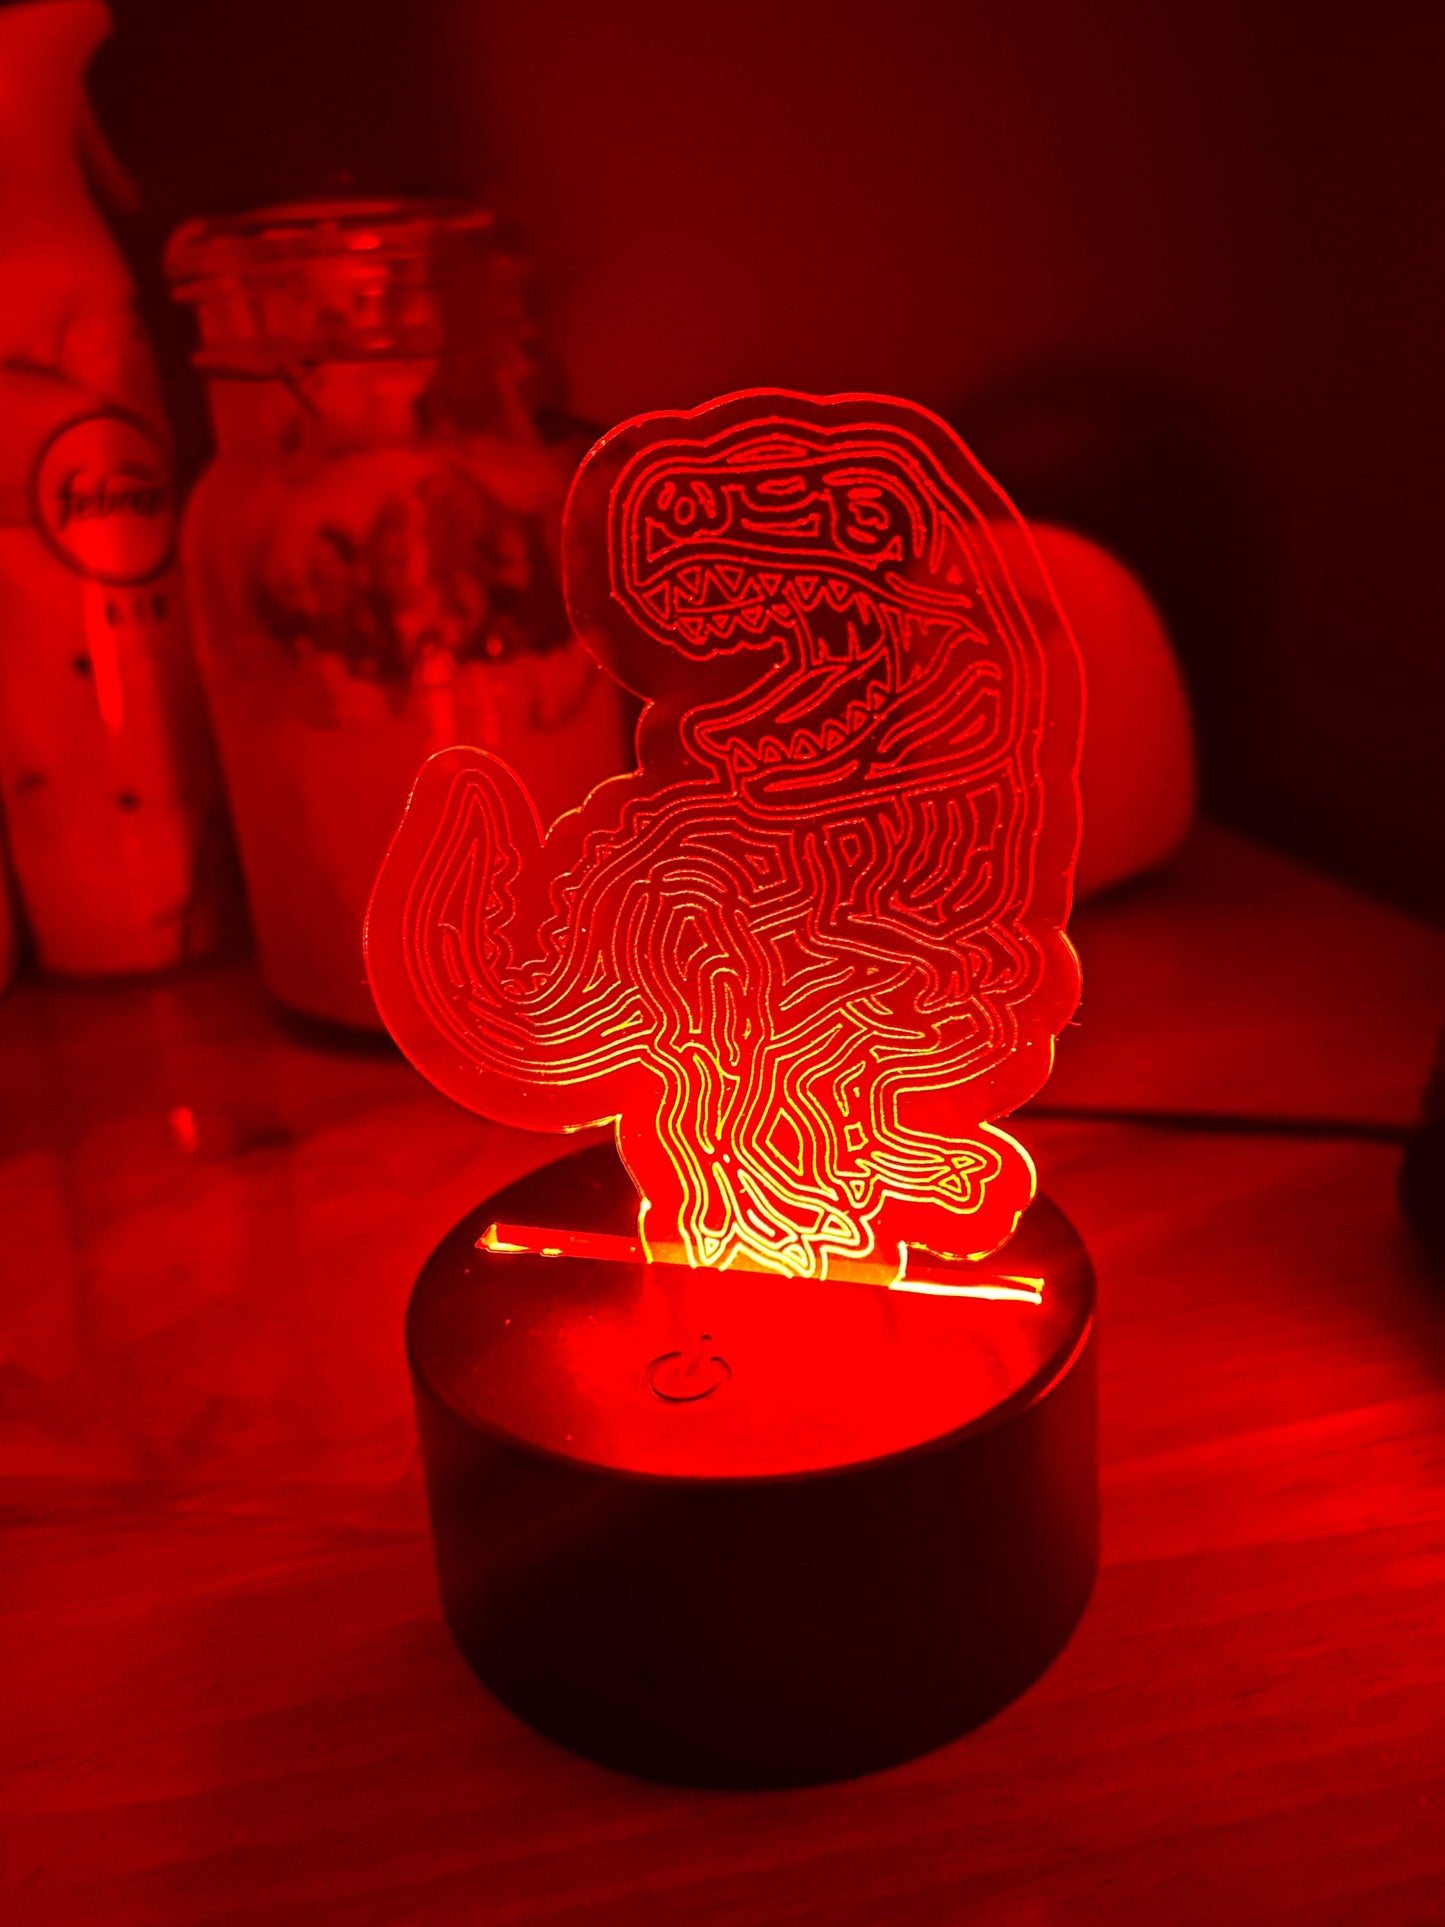 Dinosaur Engraved Night Light | LED Night Lamp | Personalized | Remote Battery Operated | USB | Color Changing Light | Custom Engraving